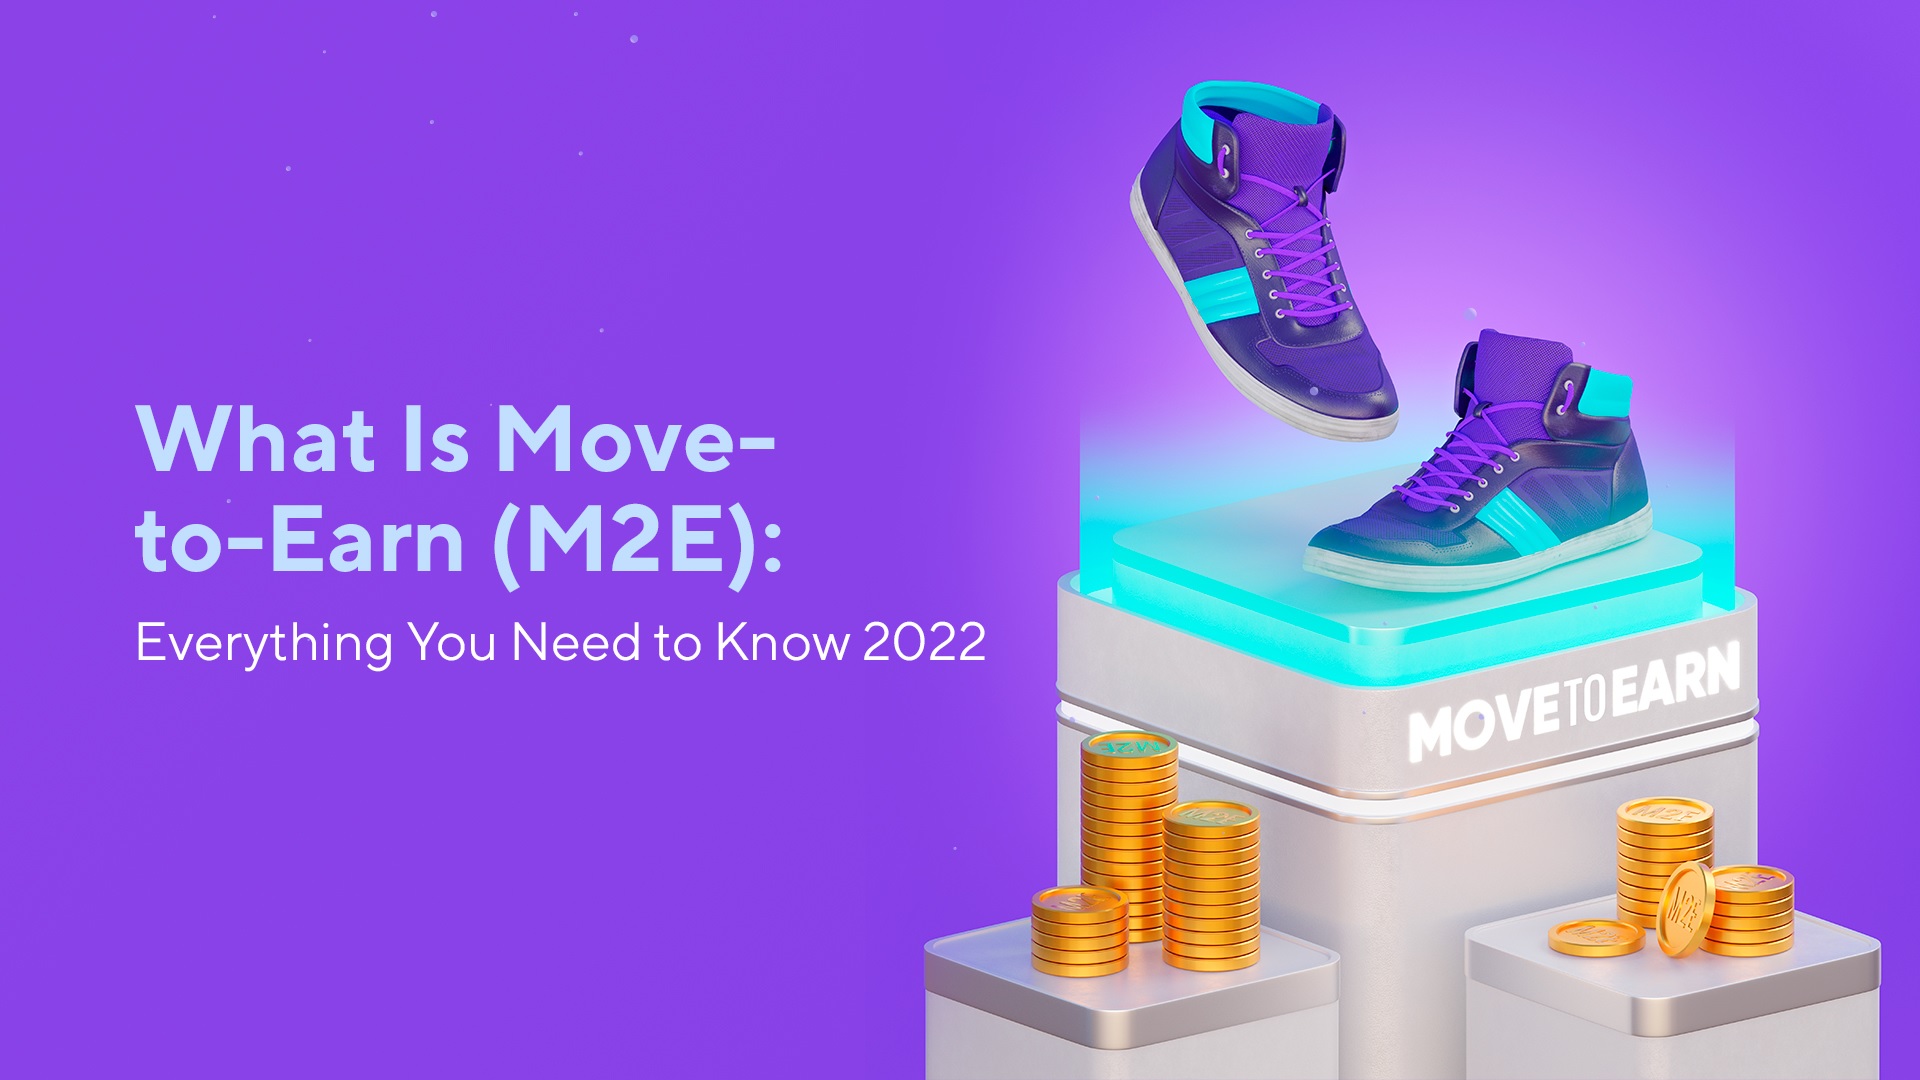 What Is Move-to-Earn (M2E): Everything You Need to Know